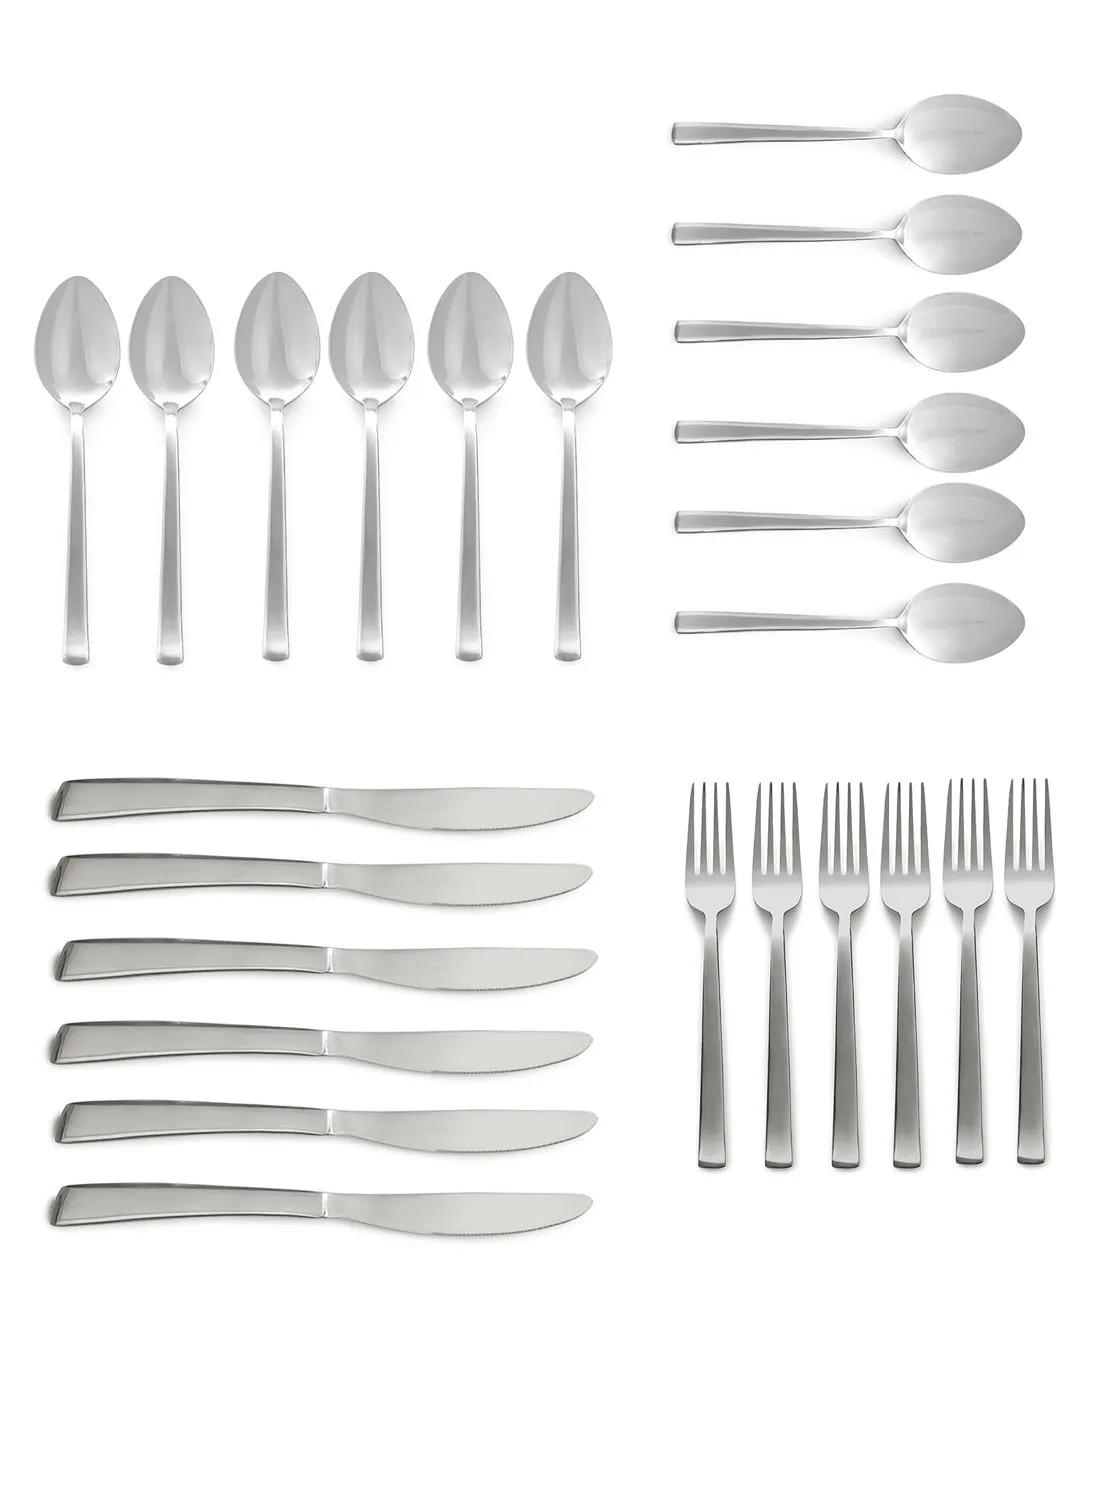 noon east 24 Piece Cutlery Set - Made Of Stainless Steel - Silverware Flatware - Spoons And Forks Set, Spoon Set - Table Spoons, Tea Spoons, Forks, Knives - Serves 6 - Design Silver Spade